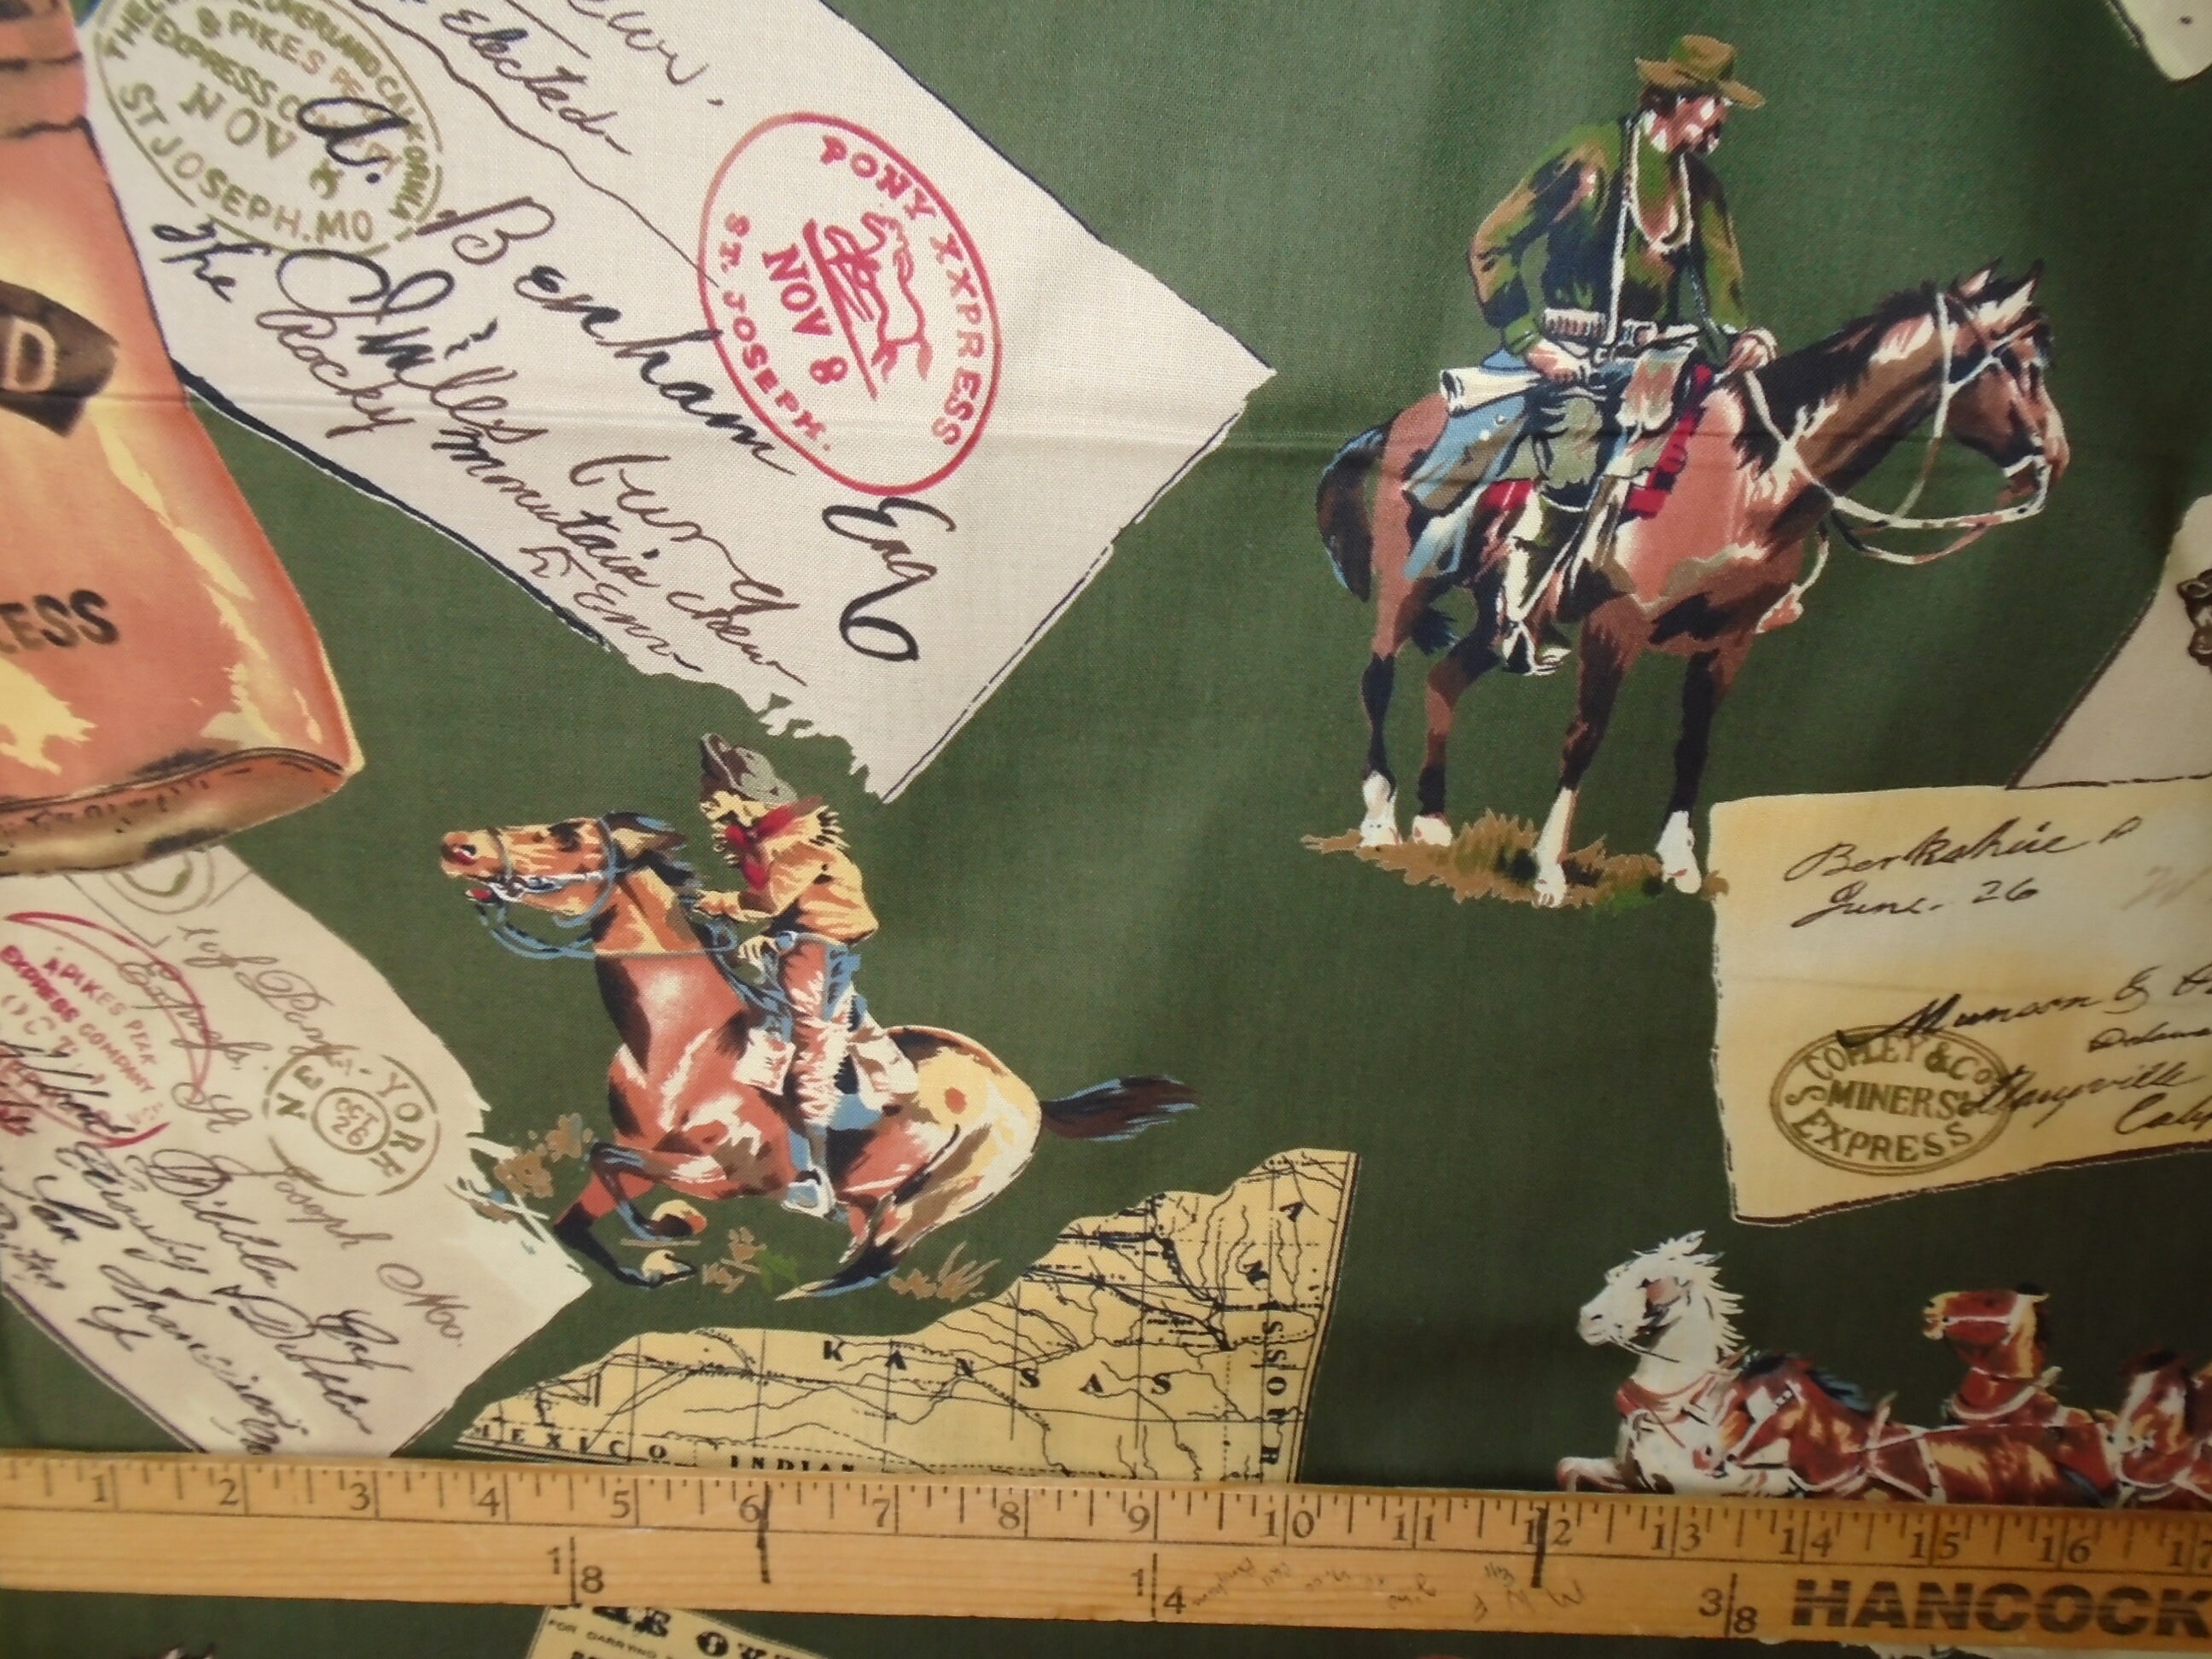 Cowboys Horses Stagecoach Beige Toile sewing fabric by the yard